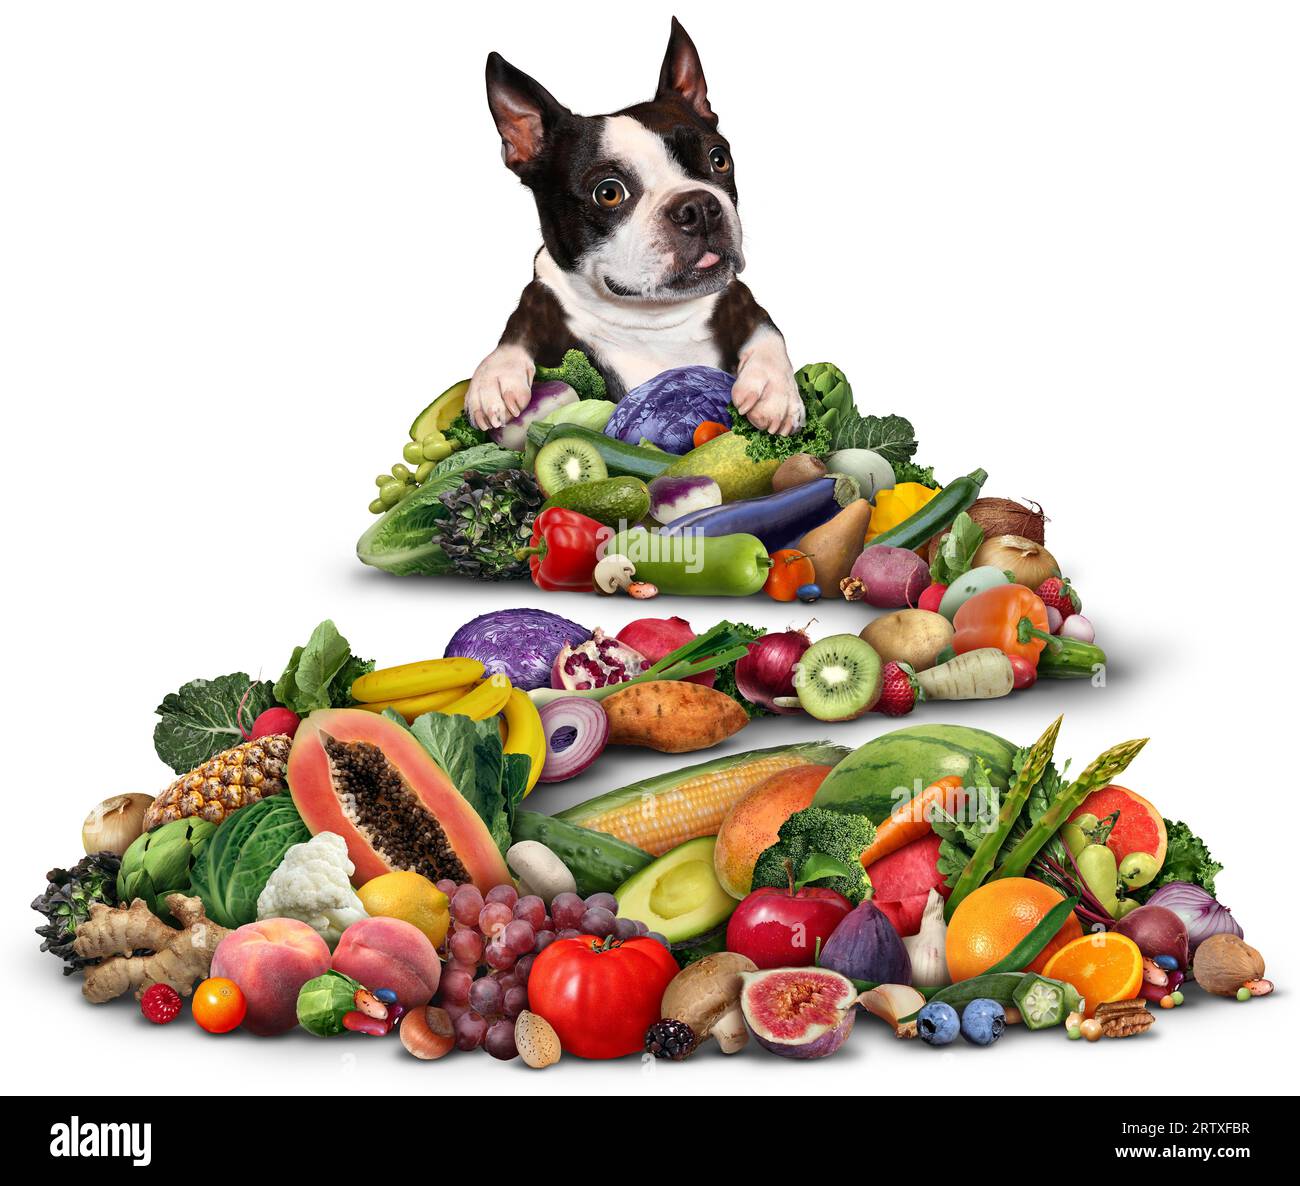 Vegetarian or Vegan dog Diet and canine vegetable and fruit Diet as health benefits for dogs eating fruits and vegetables as plant-based diets Stock Photo